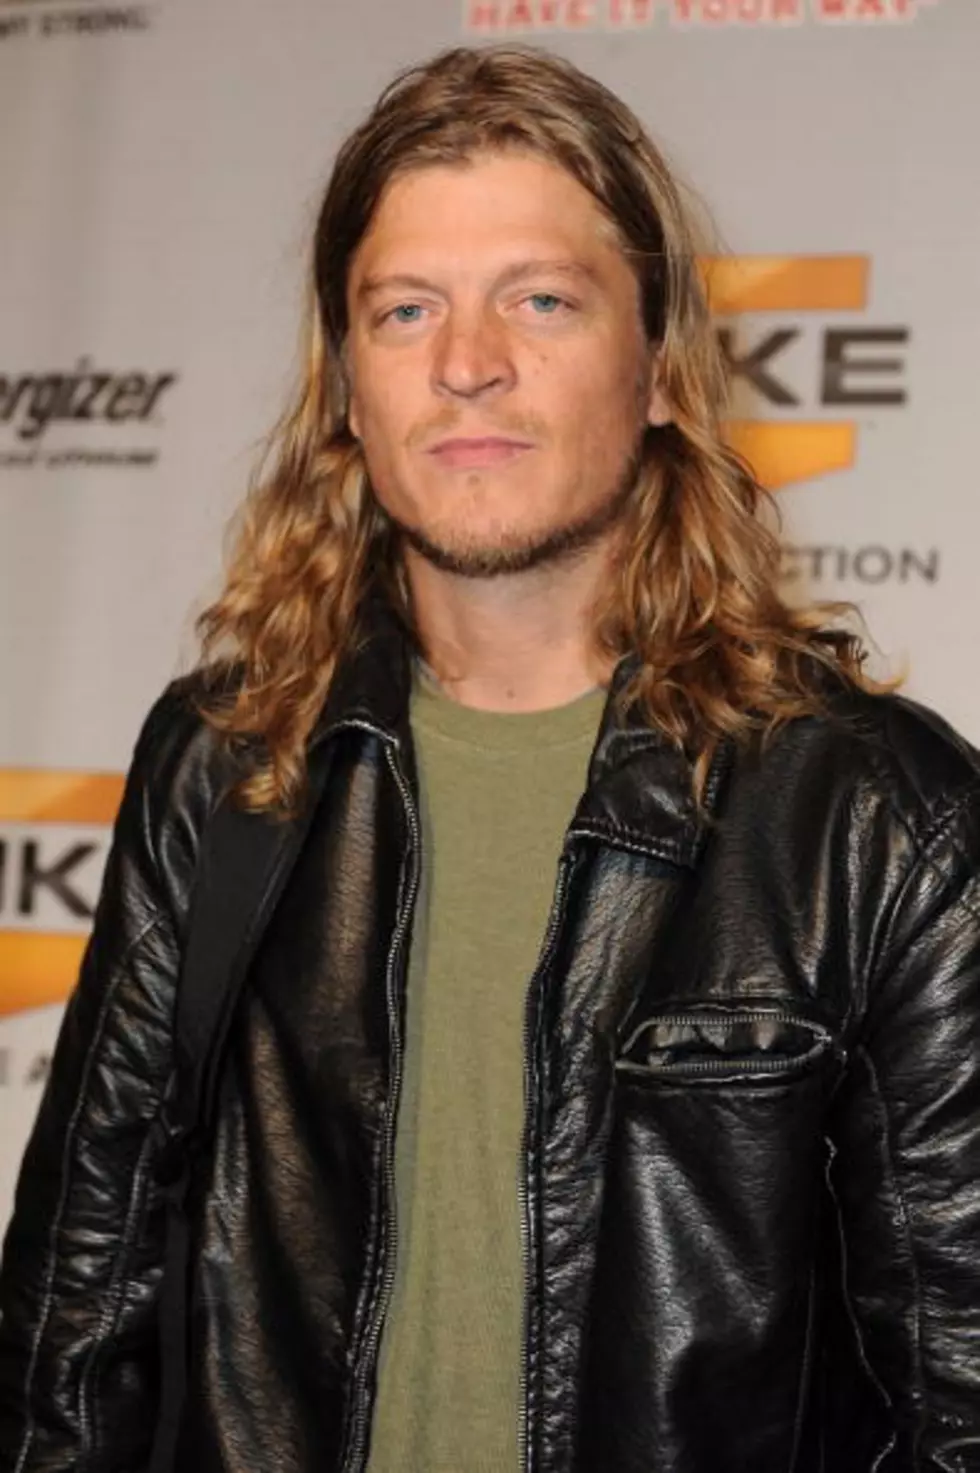 Puddle of Mudd Frontman Arrested for DWI After Going 100 mph in MN